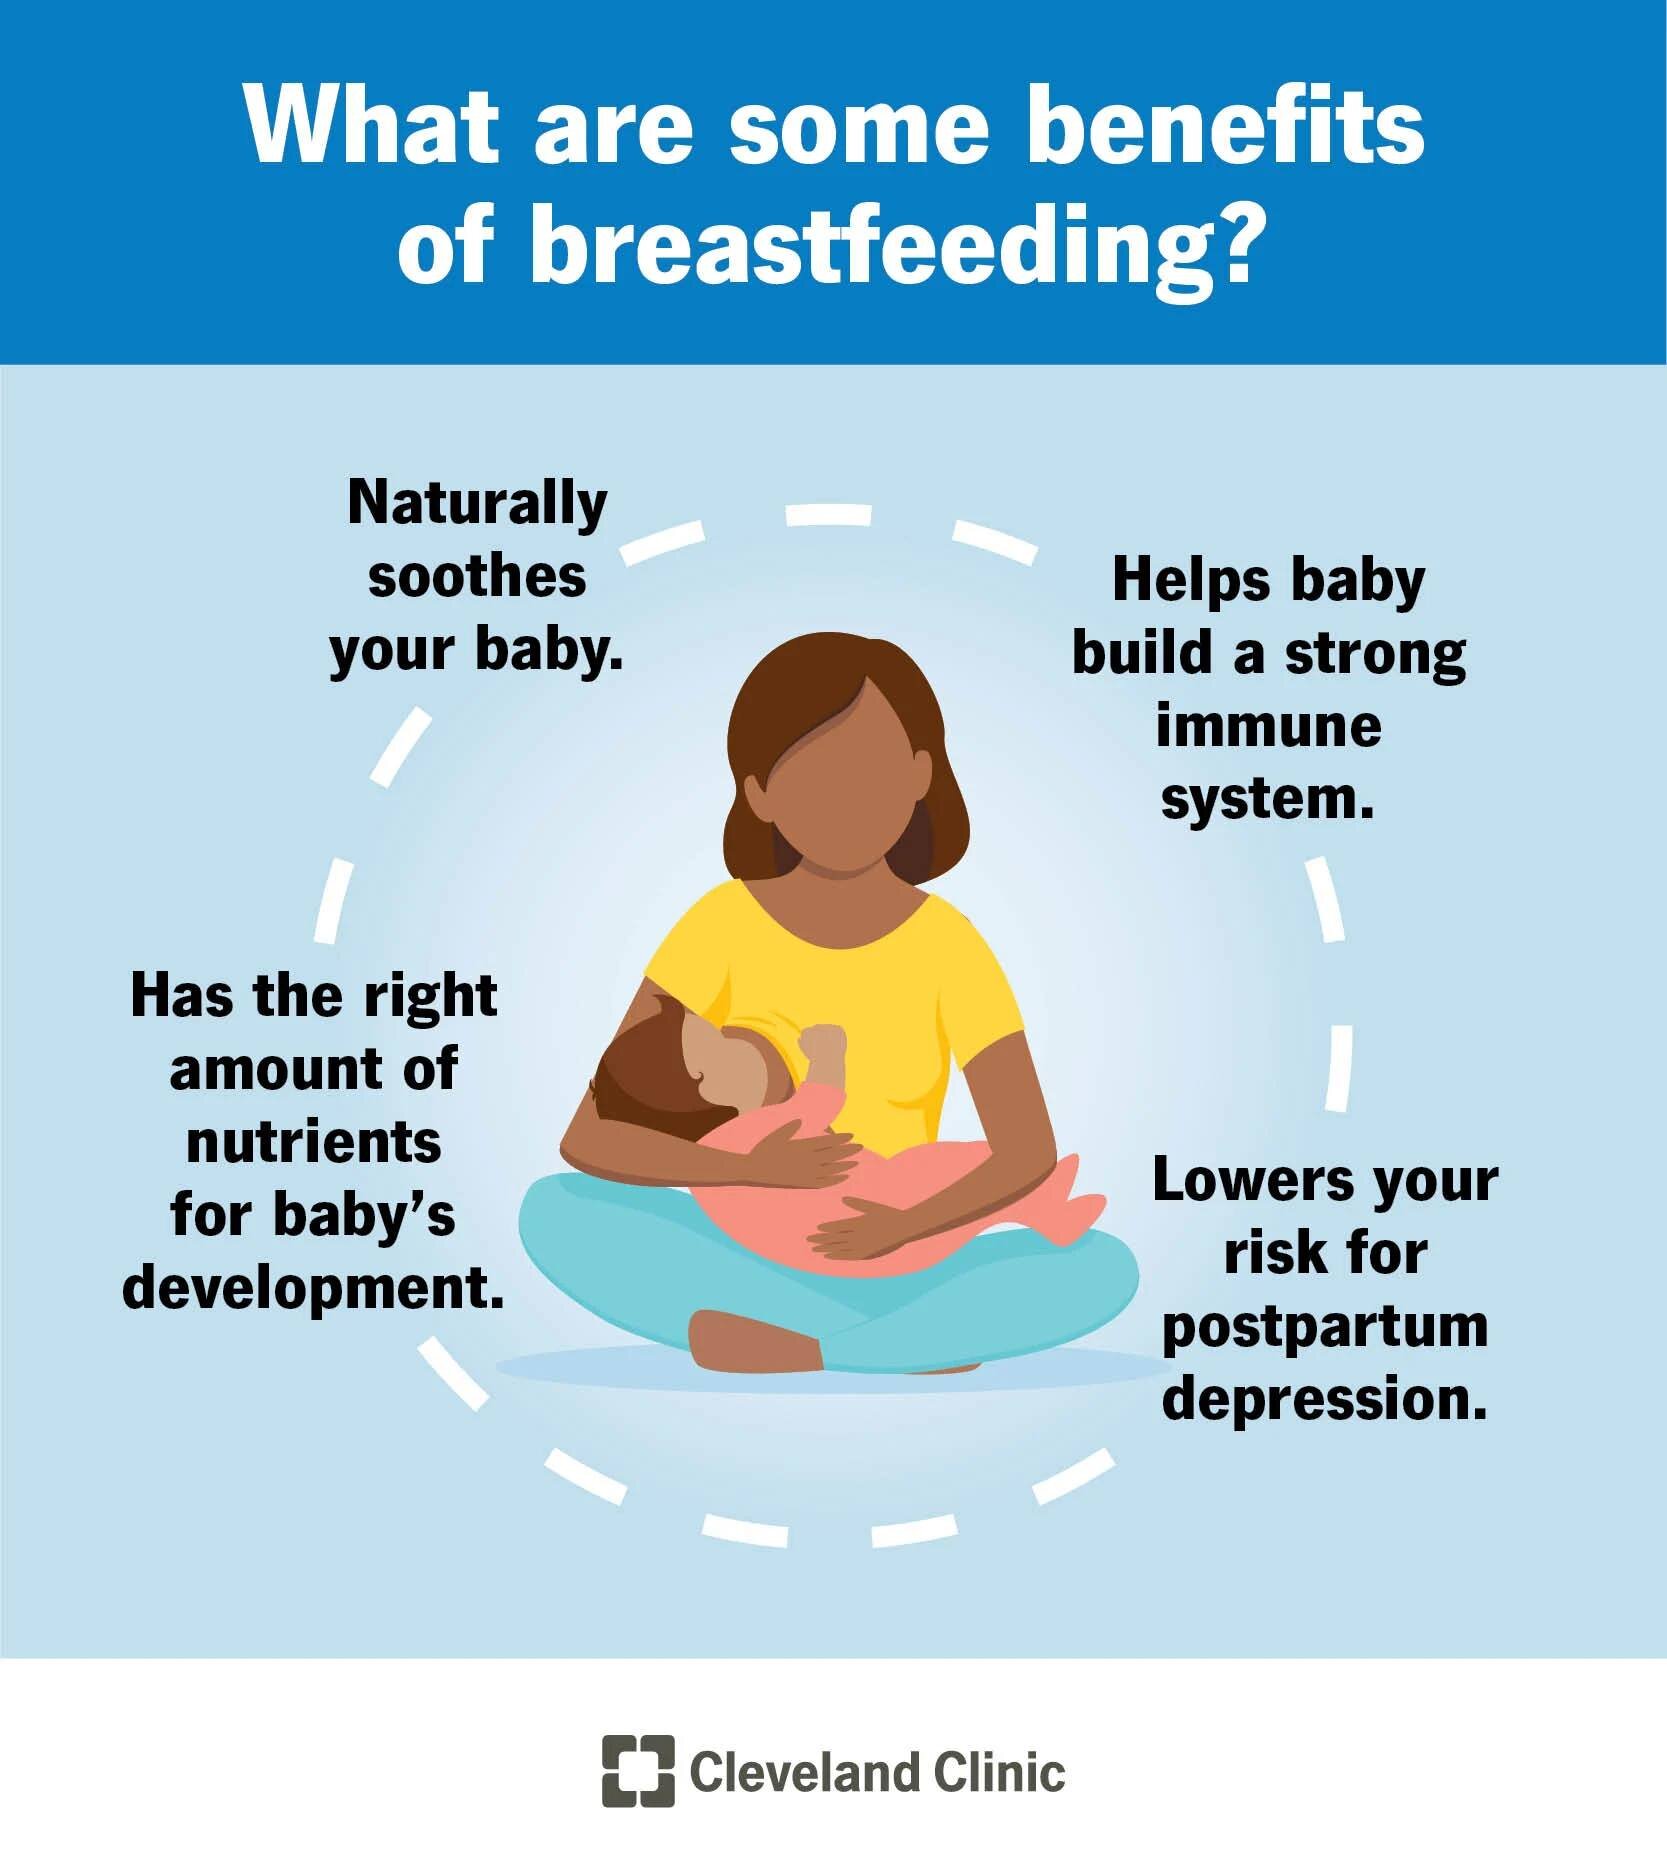 Breastfeeding benefits both you and your baby!